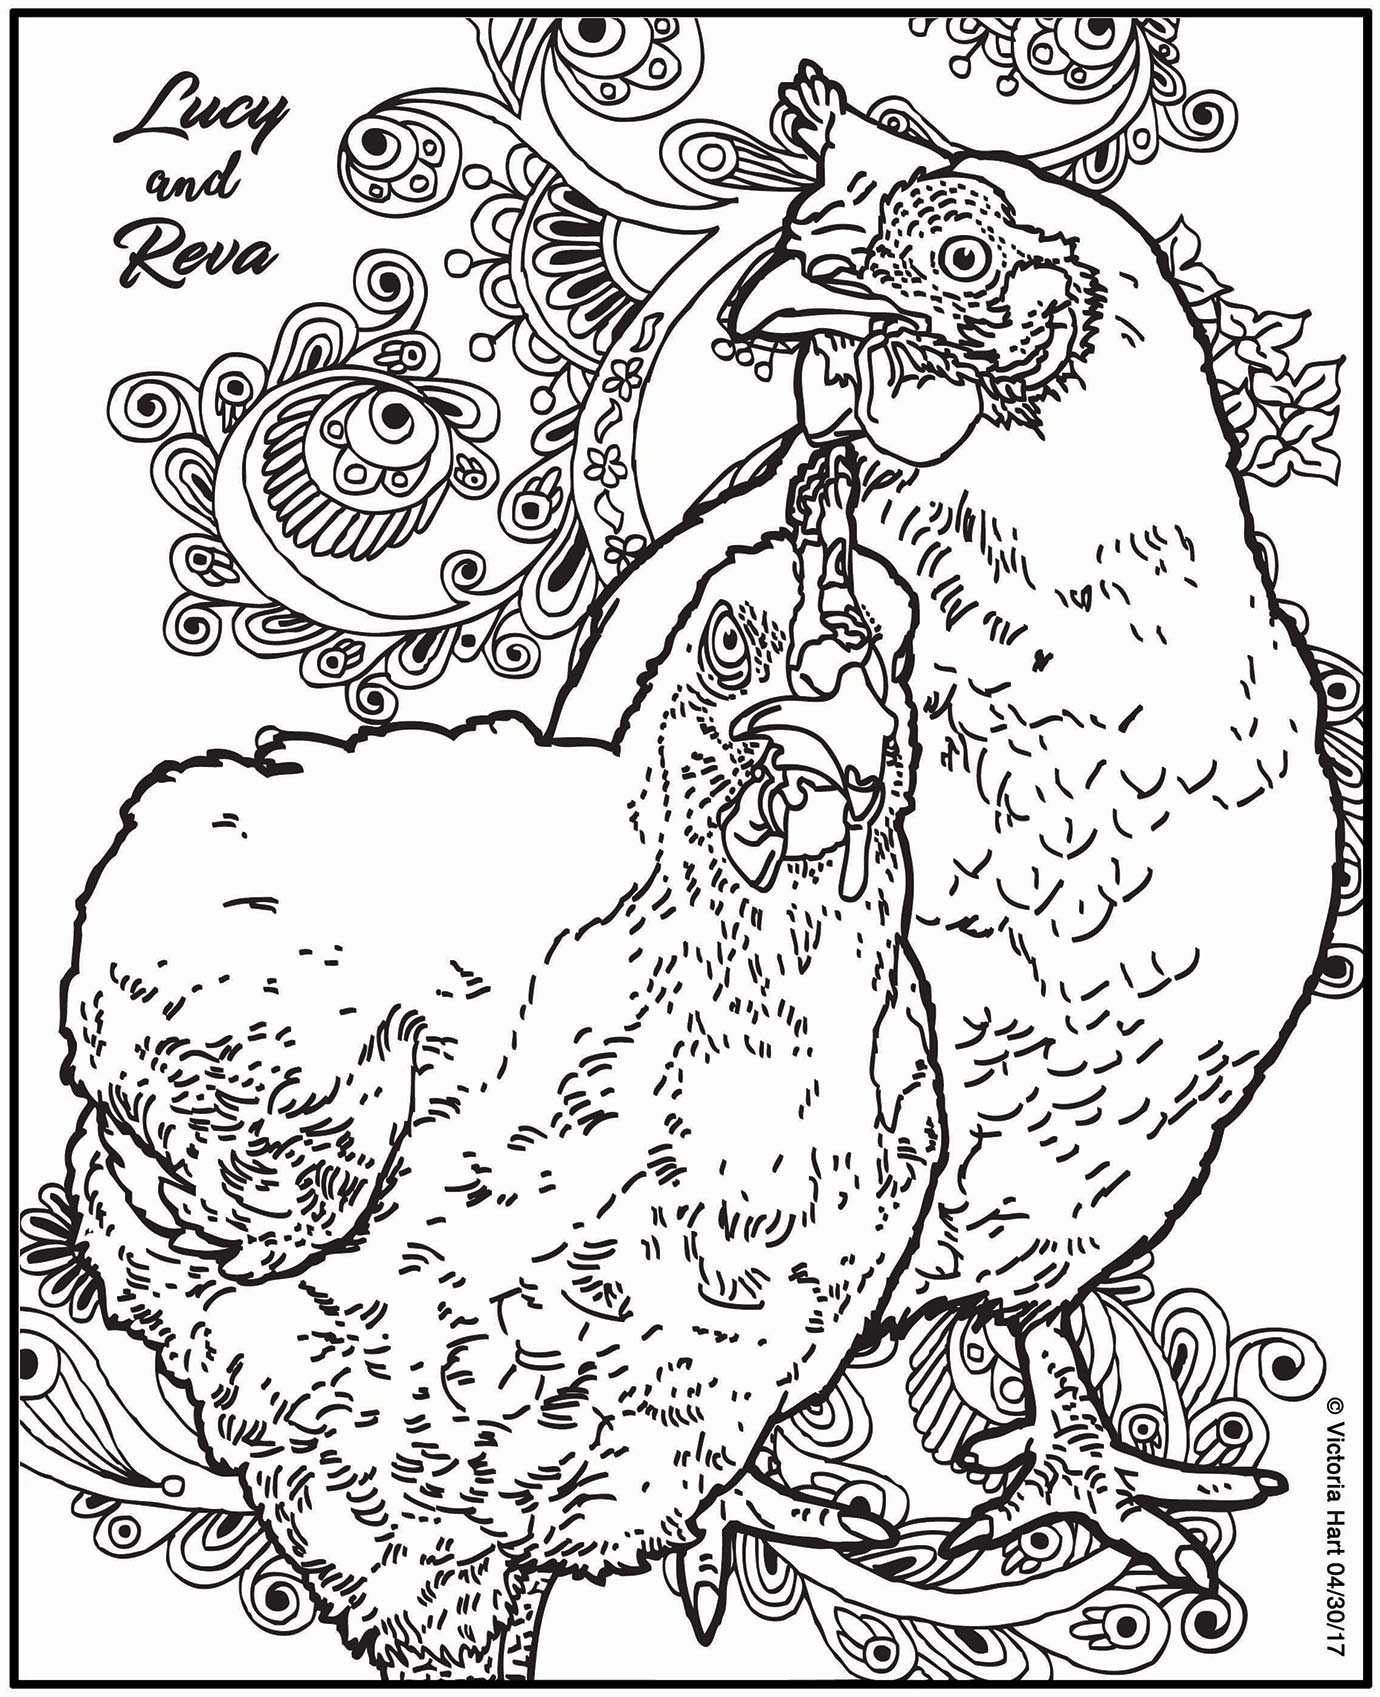 Drawing of chickens Reva and Lucy as a children's coloring picture.